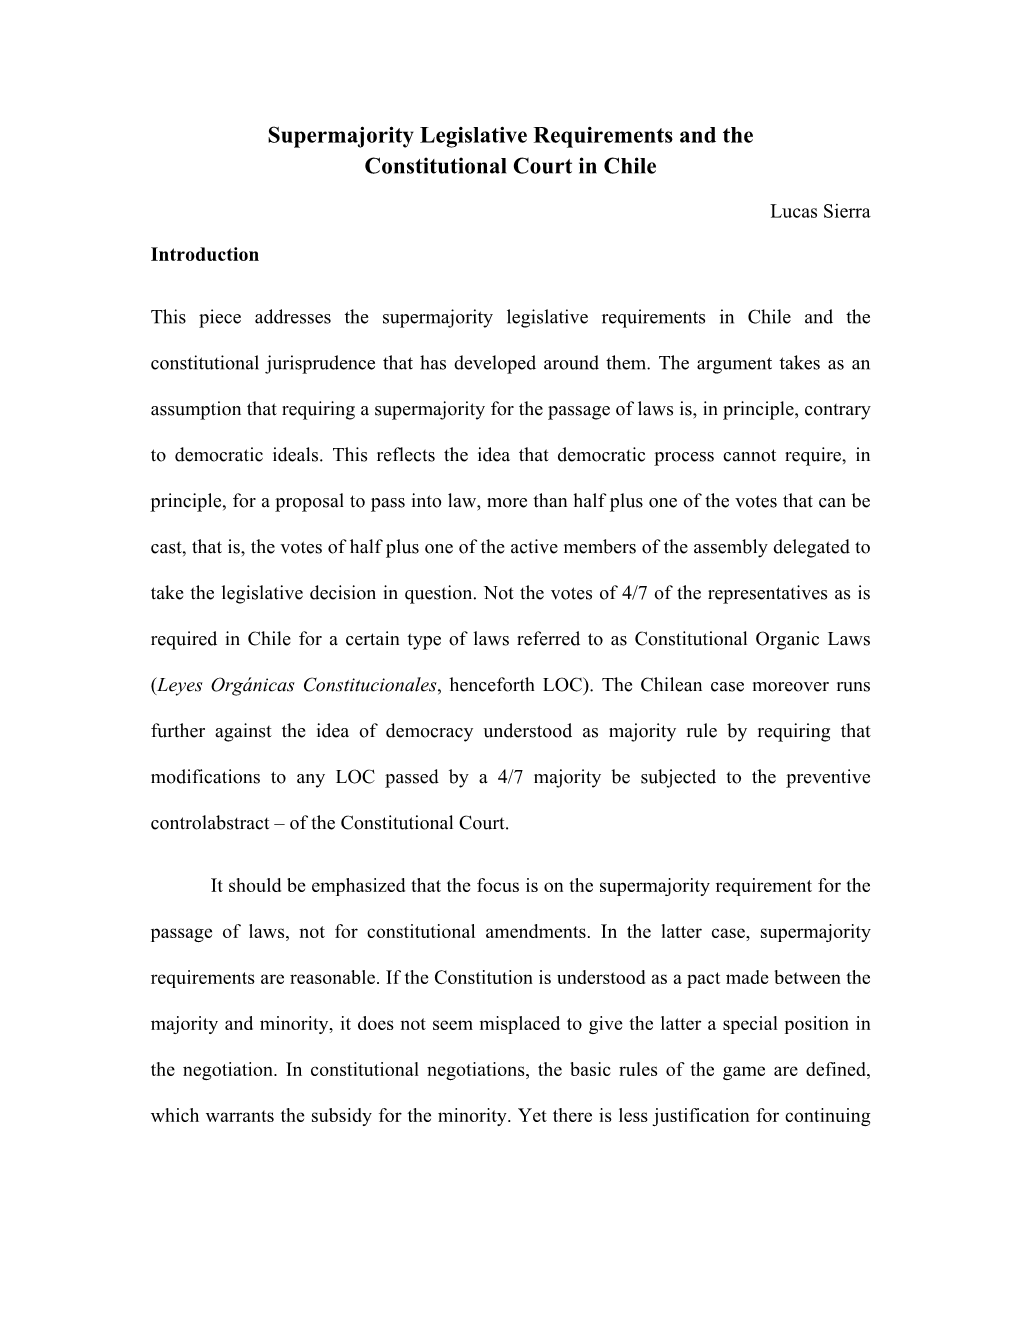 Supermajority Legislative Requirements and the Constitutional Court in Chile